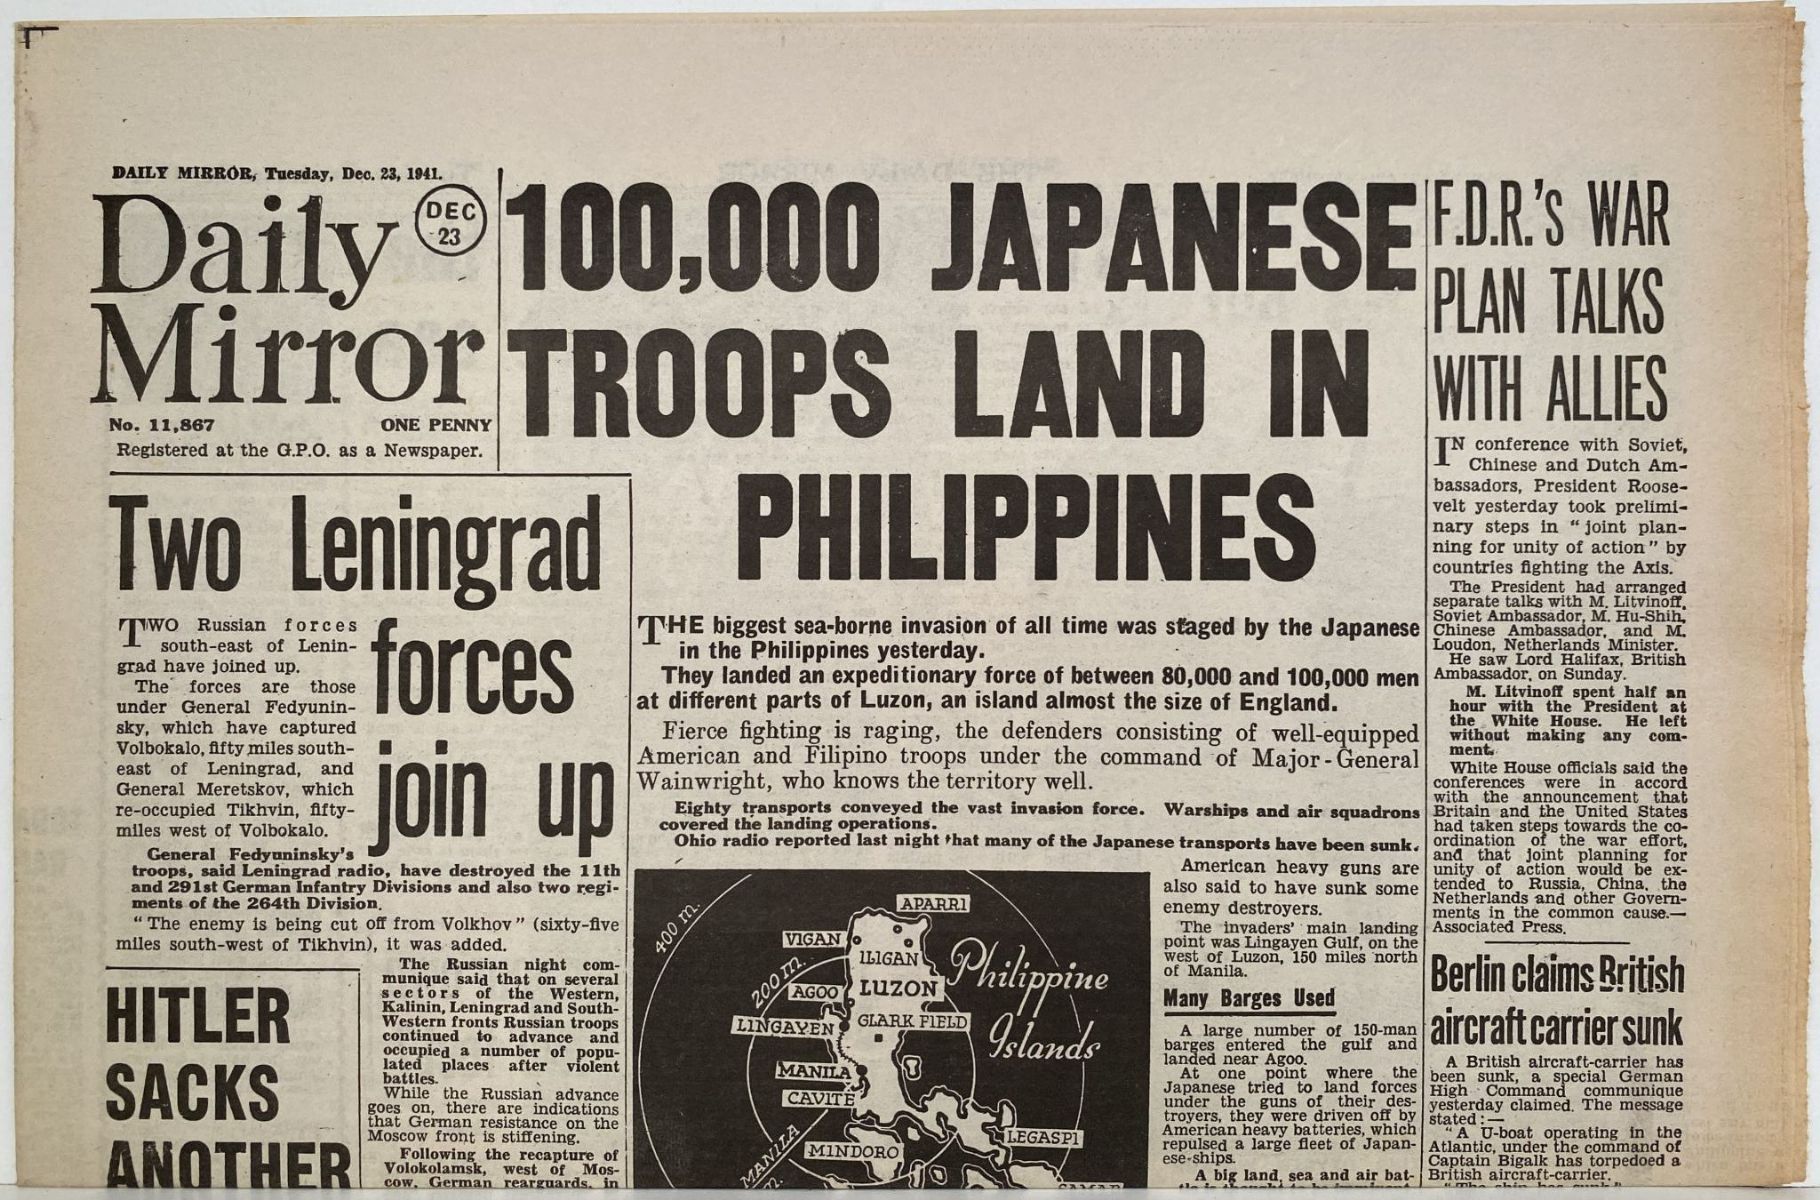 OLD WARTIME NEWSPAPER: Daily Mirror, Tuesday 23rd December 1941